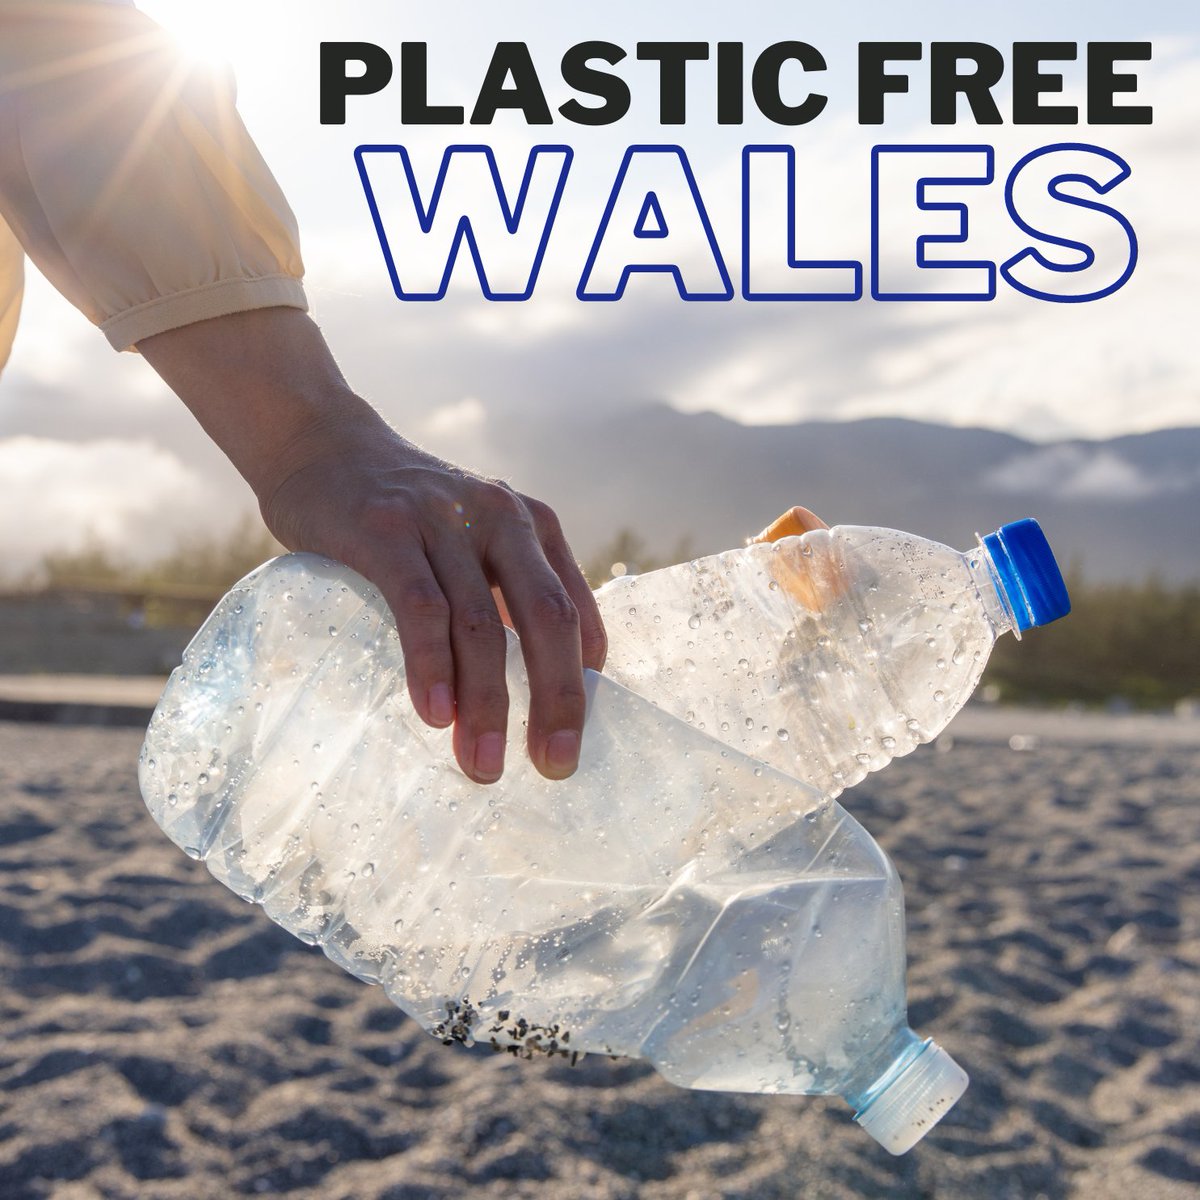 Happy #EarthDay 🌍 We want to see a Plastic Free Wales and this year's theme, #PlanetVsPlastics is all about finding smart alternatives to reduce plastic in our daily lives. We’ve already made a start on banning some single-use plastics for a greener tomorrow 💚